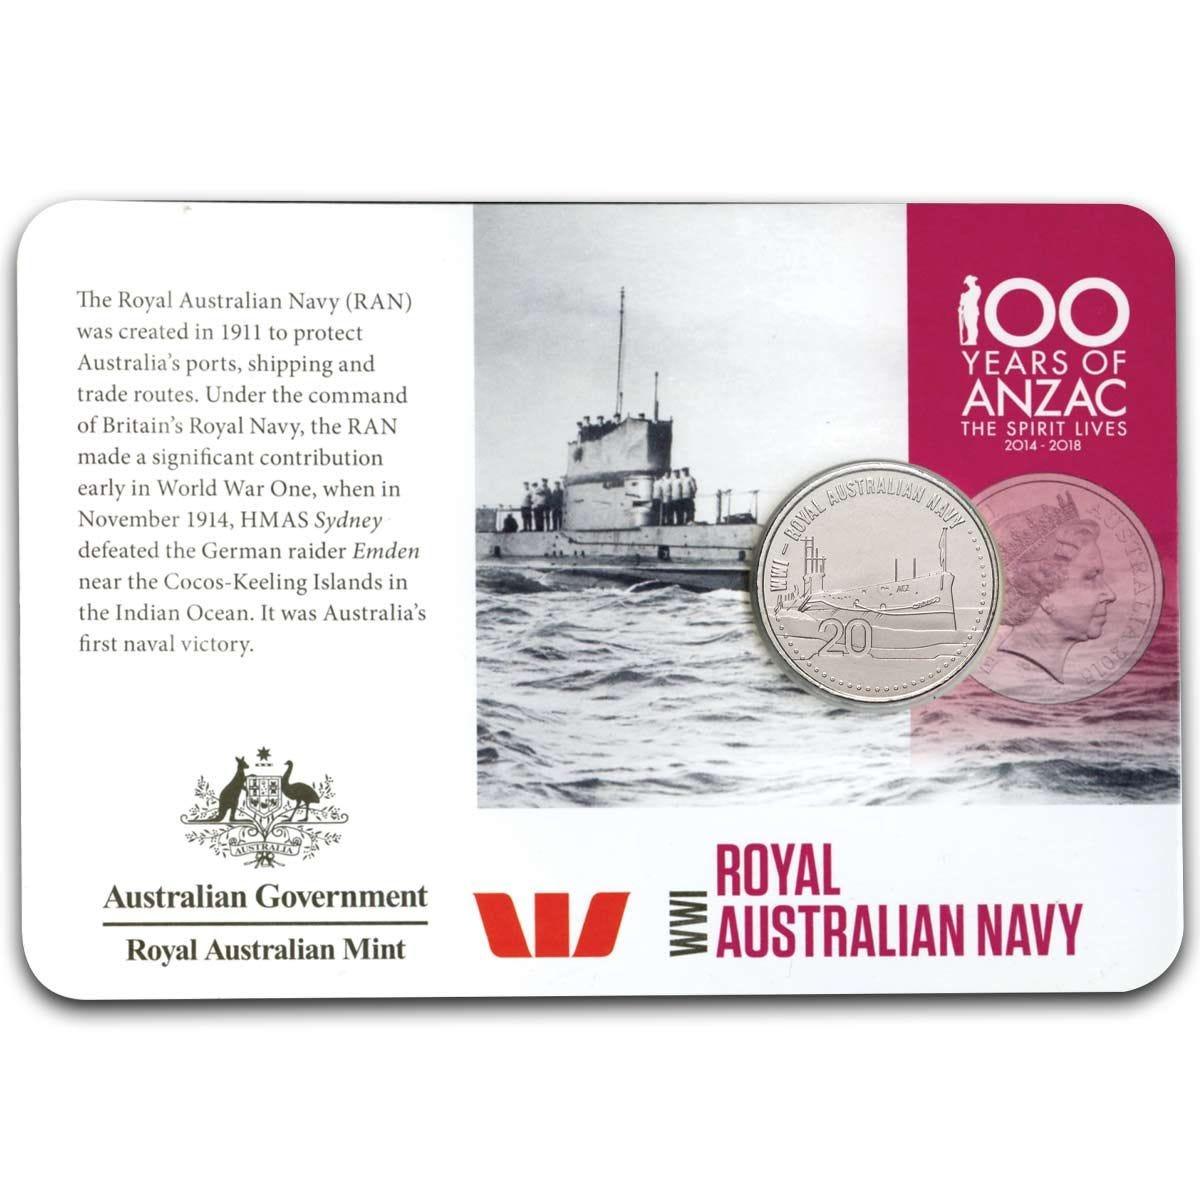 2015 ANZACS Remembered - The Royal Australian Navy - Loose Change Coins